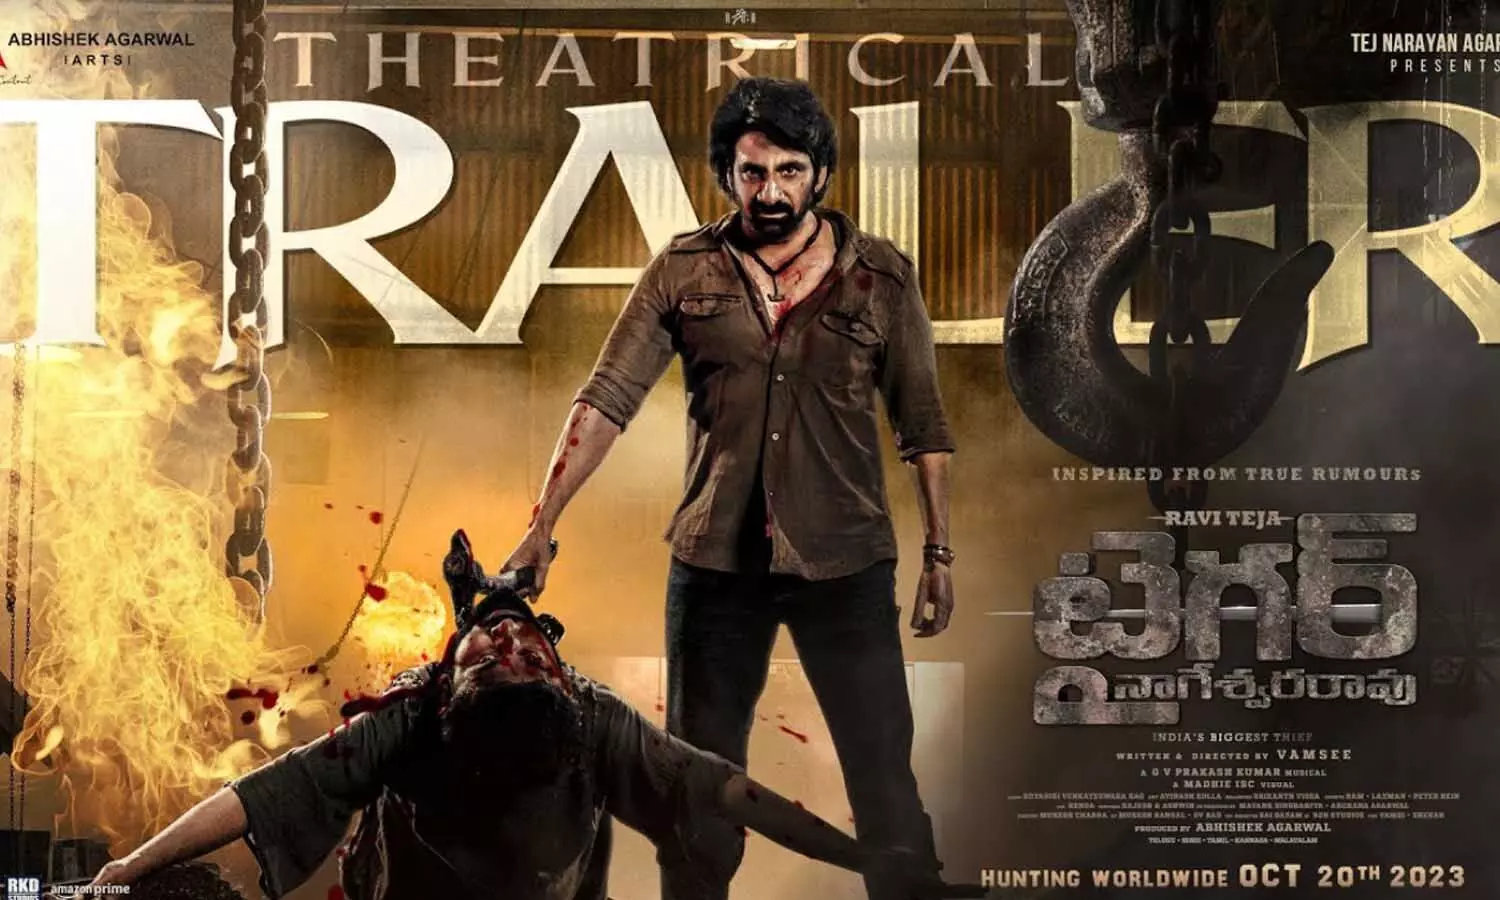 Tiger Nageswara Rao Trailer: Ravi Teja offers a thrilling cinematic experience!